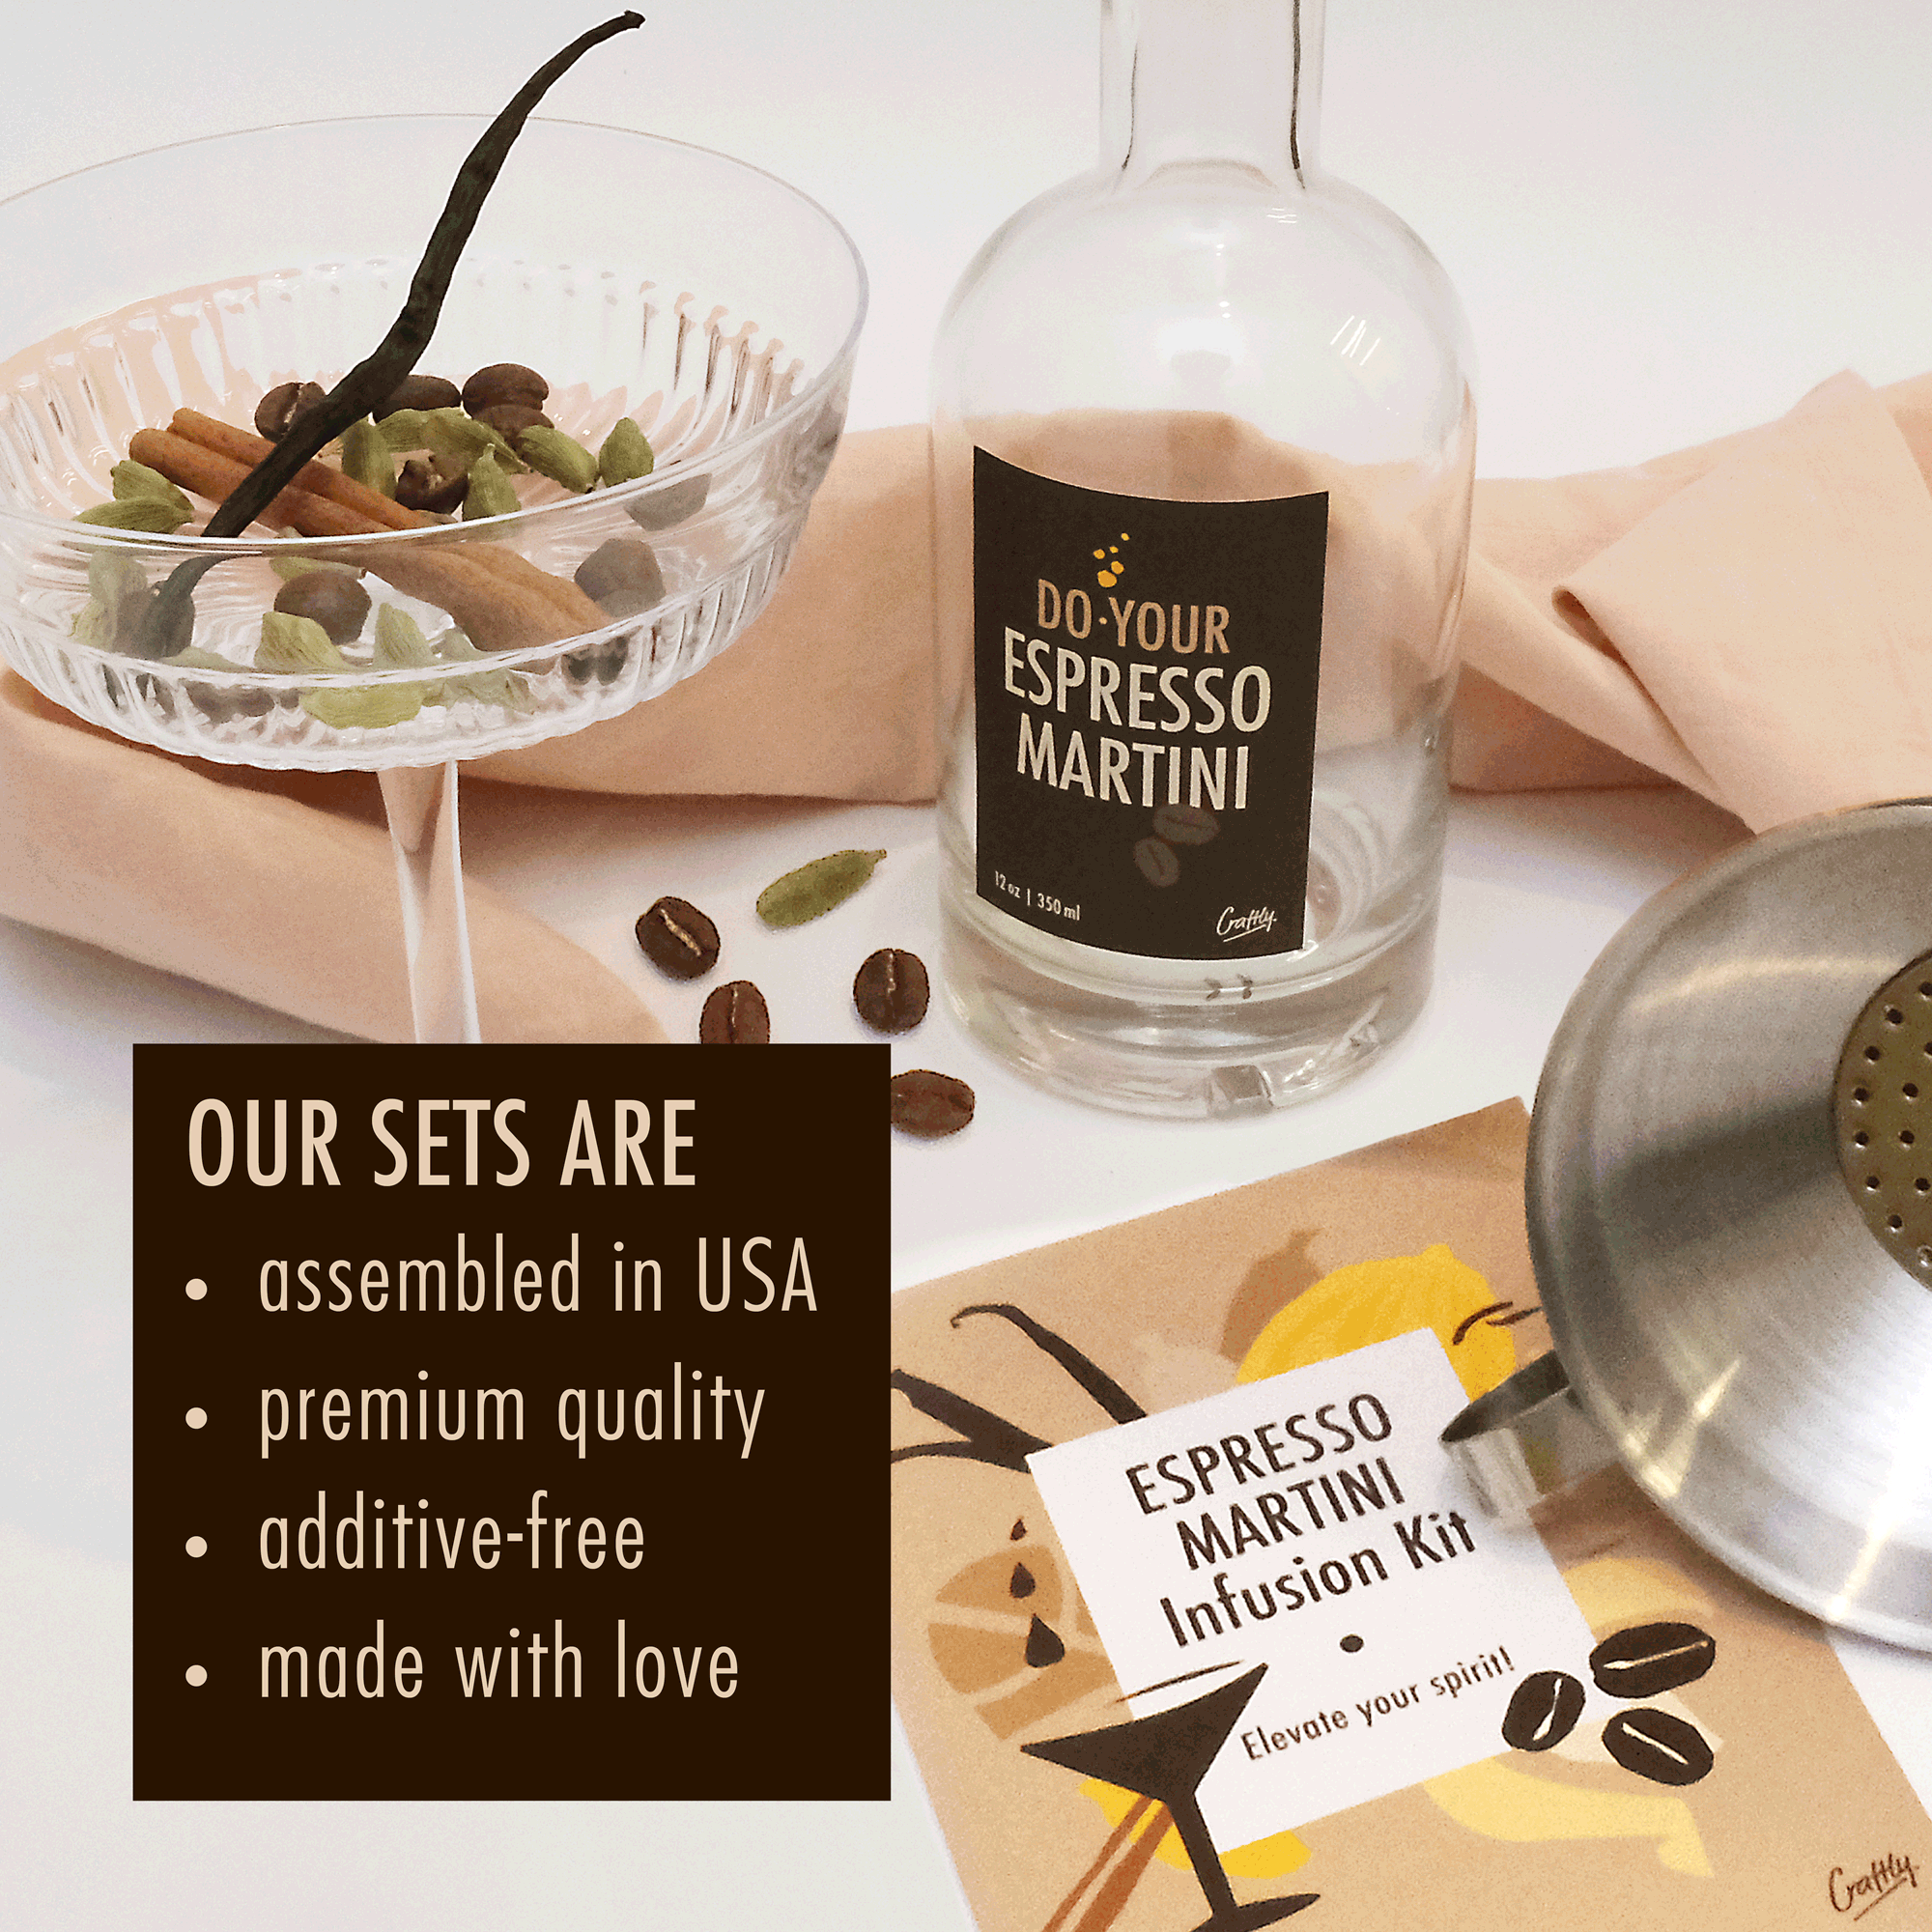 Craftly Espresso Martini Infusion Kit | Homemade Cocktails Kit | Espresso Martini Kit | Natural Cocktail Blends | Birthday Gift for Her | Gifts for